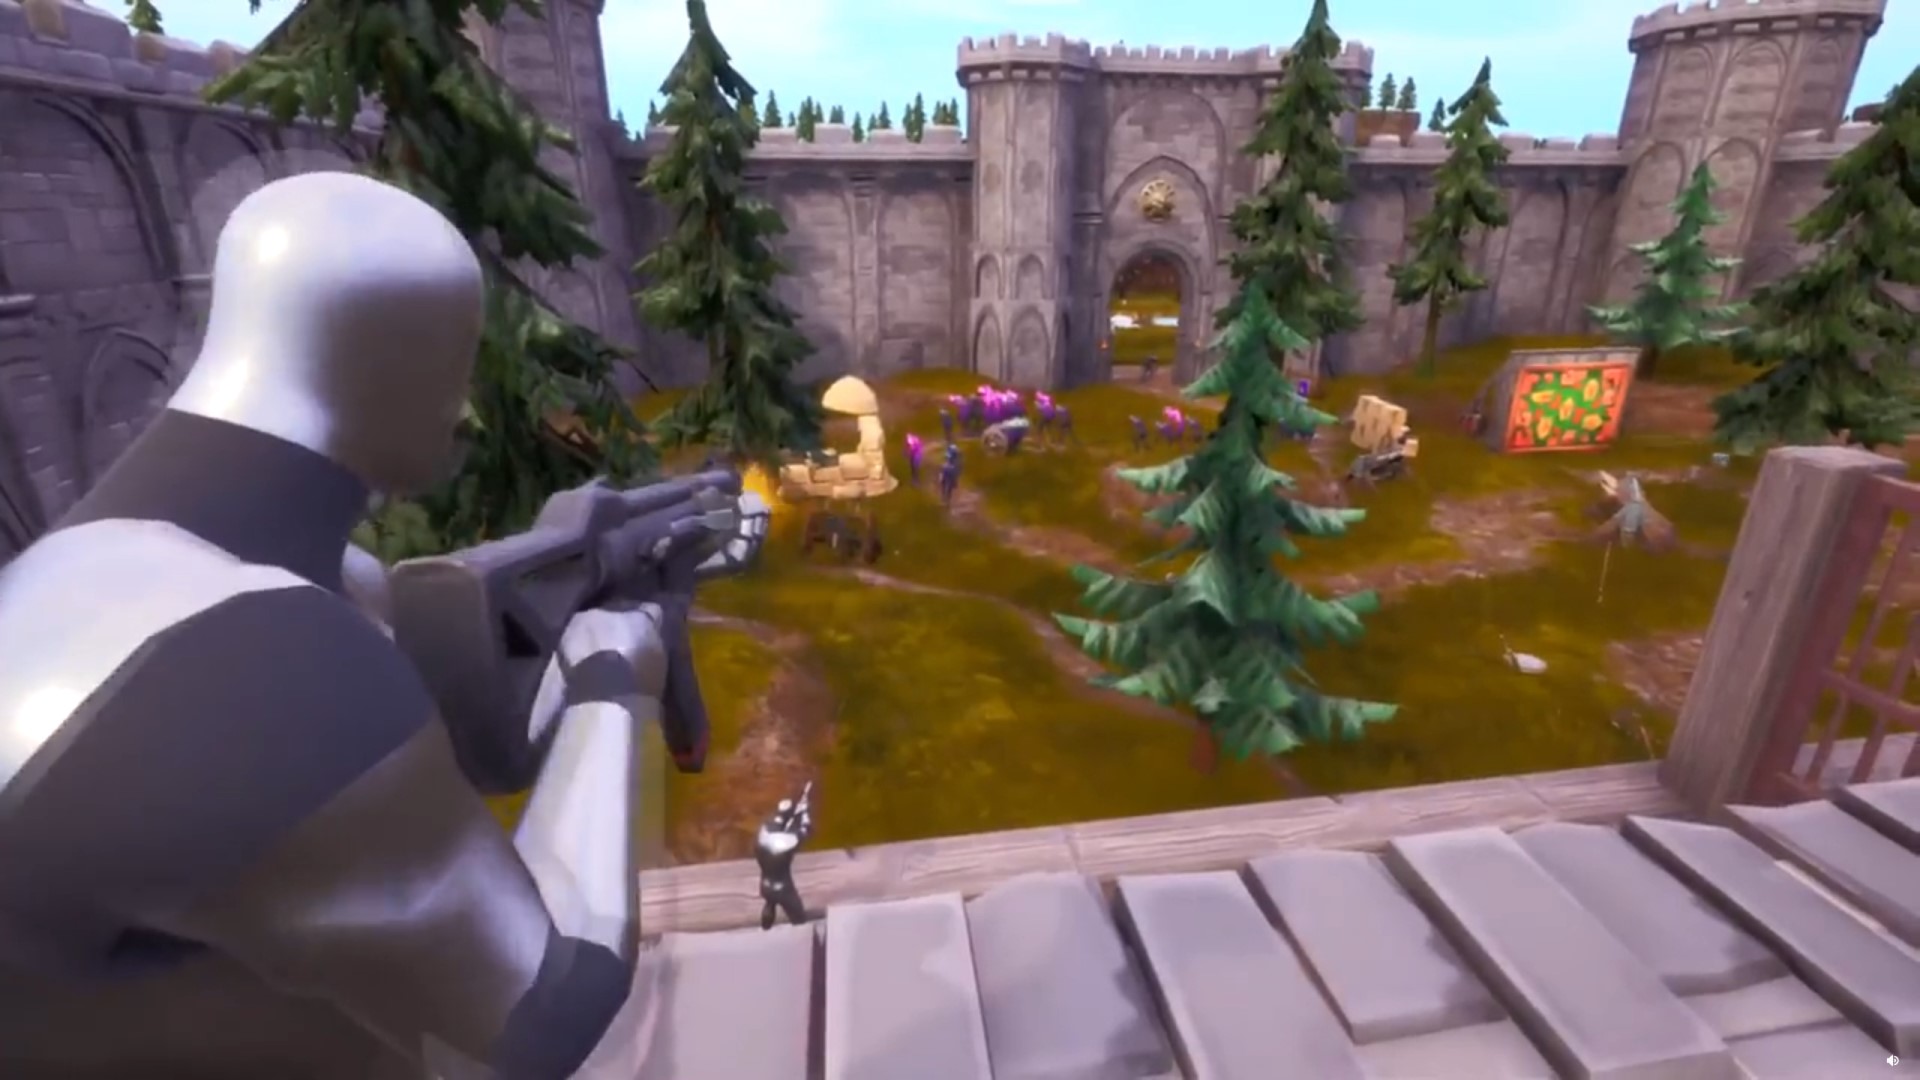 Fortnite tower defence map takes the game back to its roots